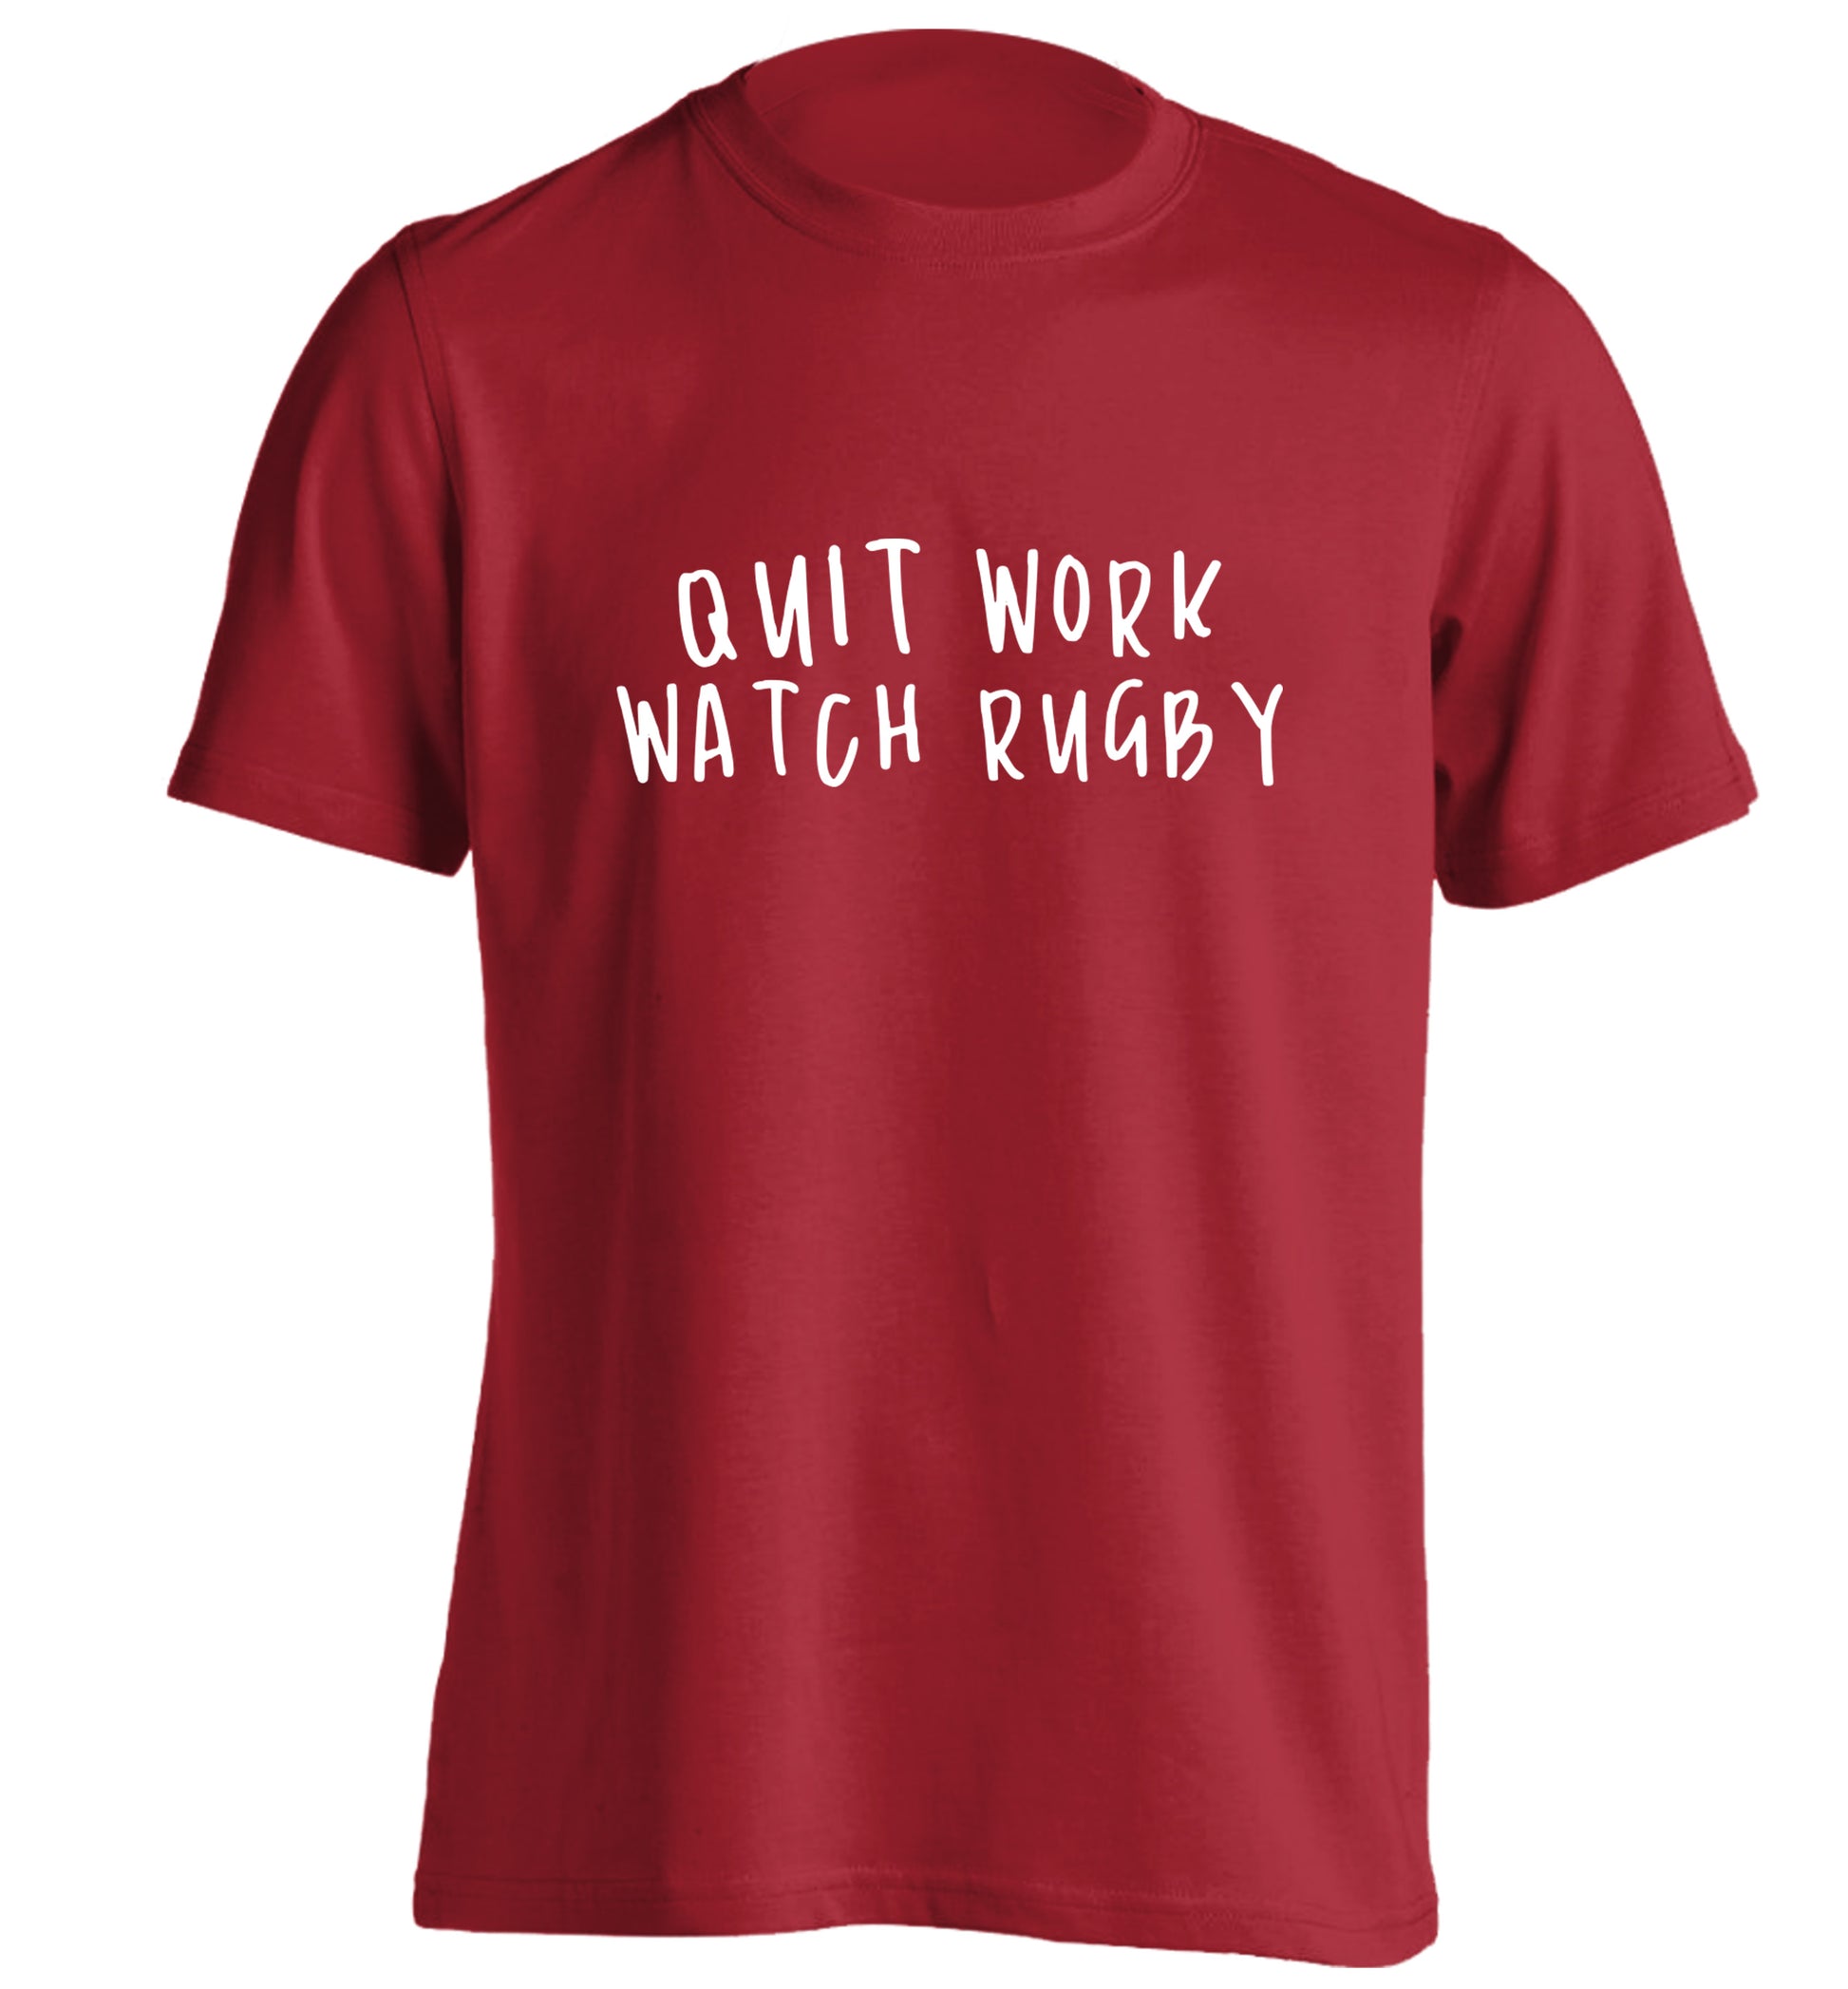 Quit work watch rugby adults unisex red Tshirt 2XL